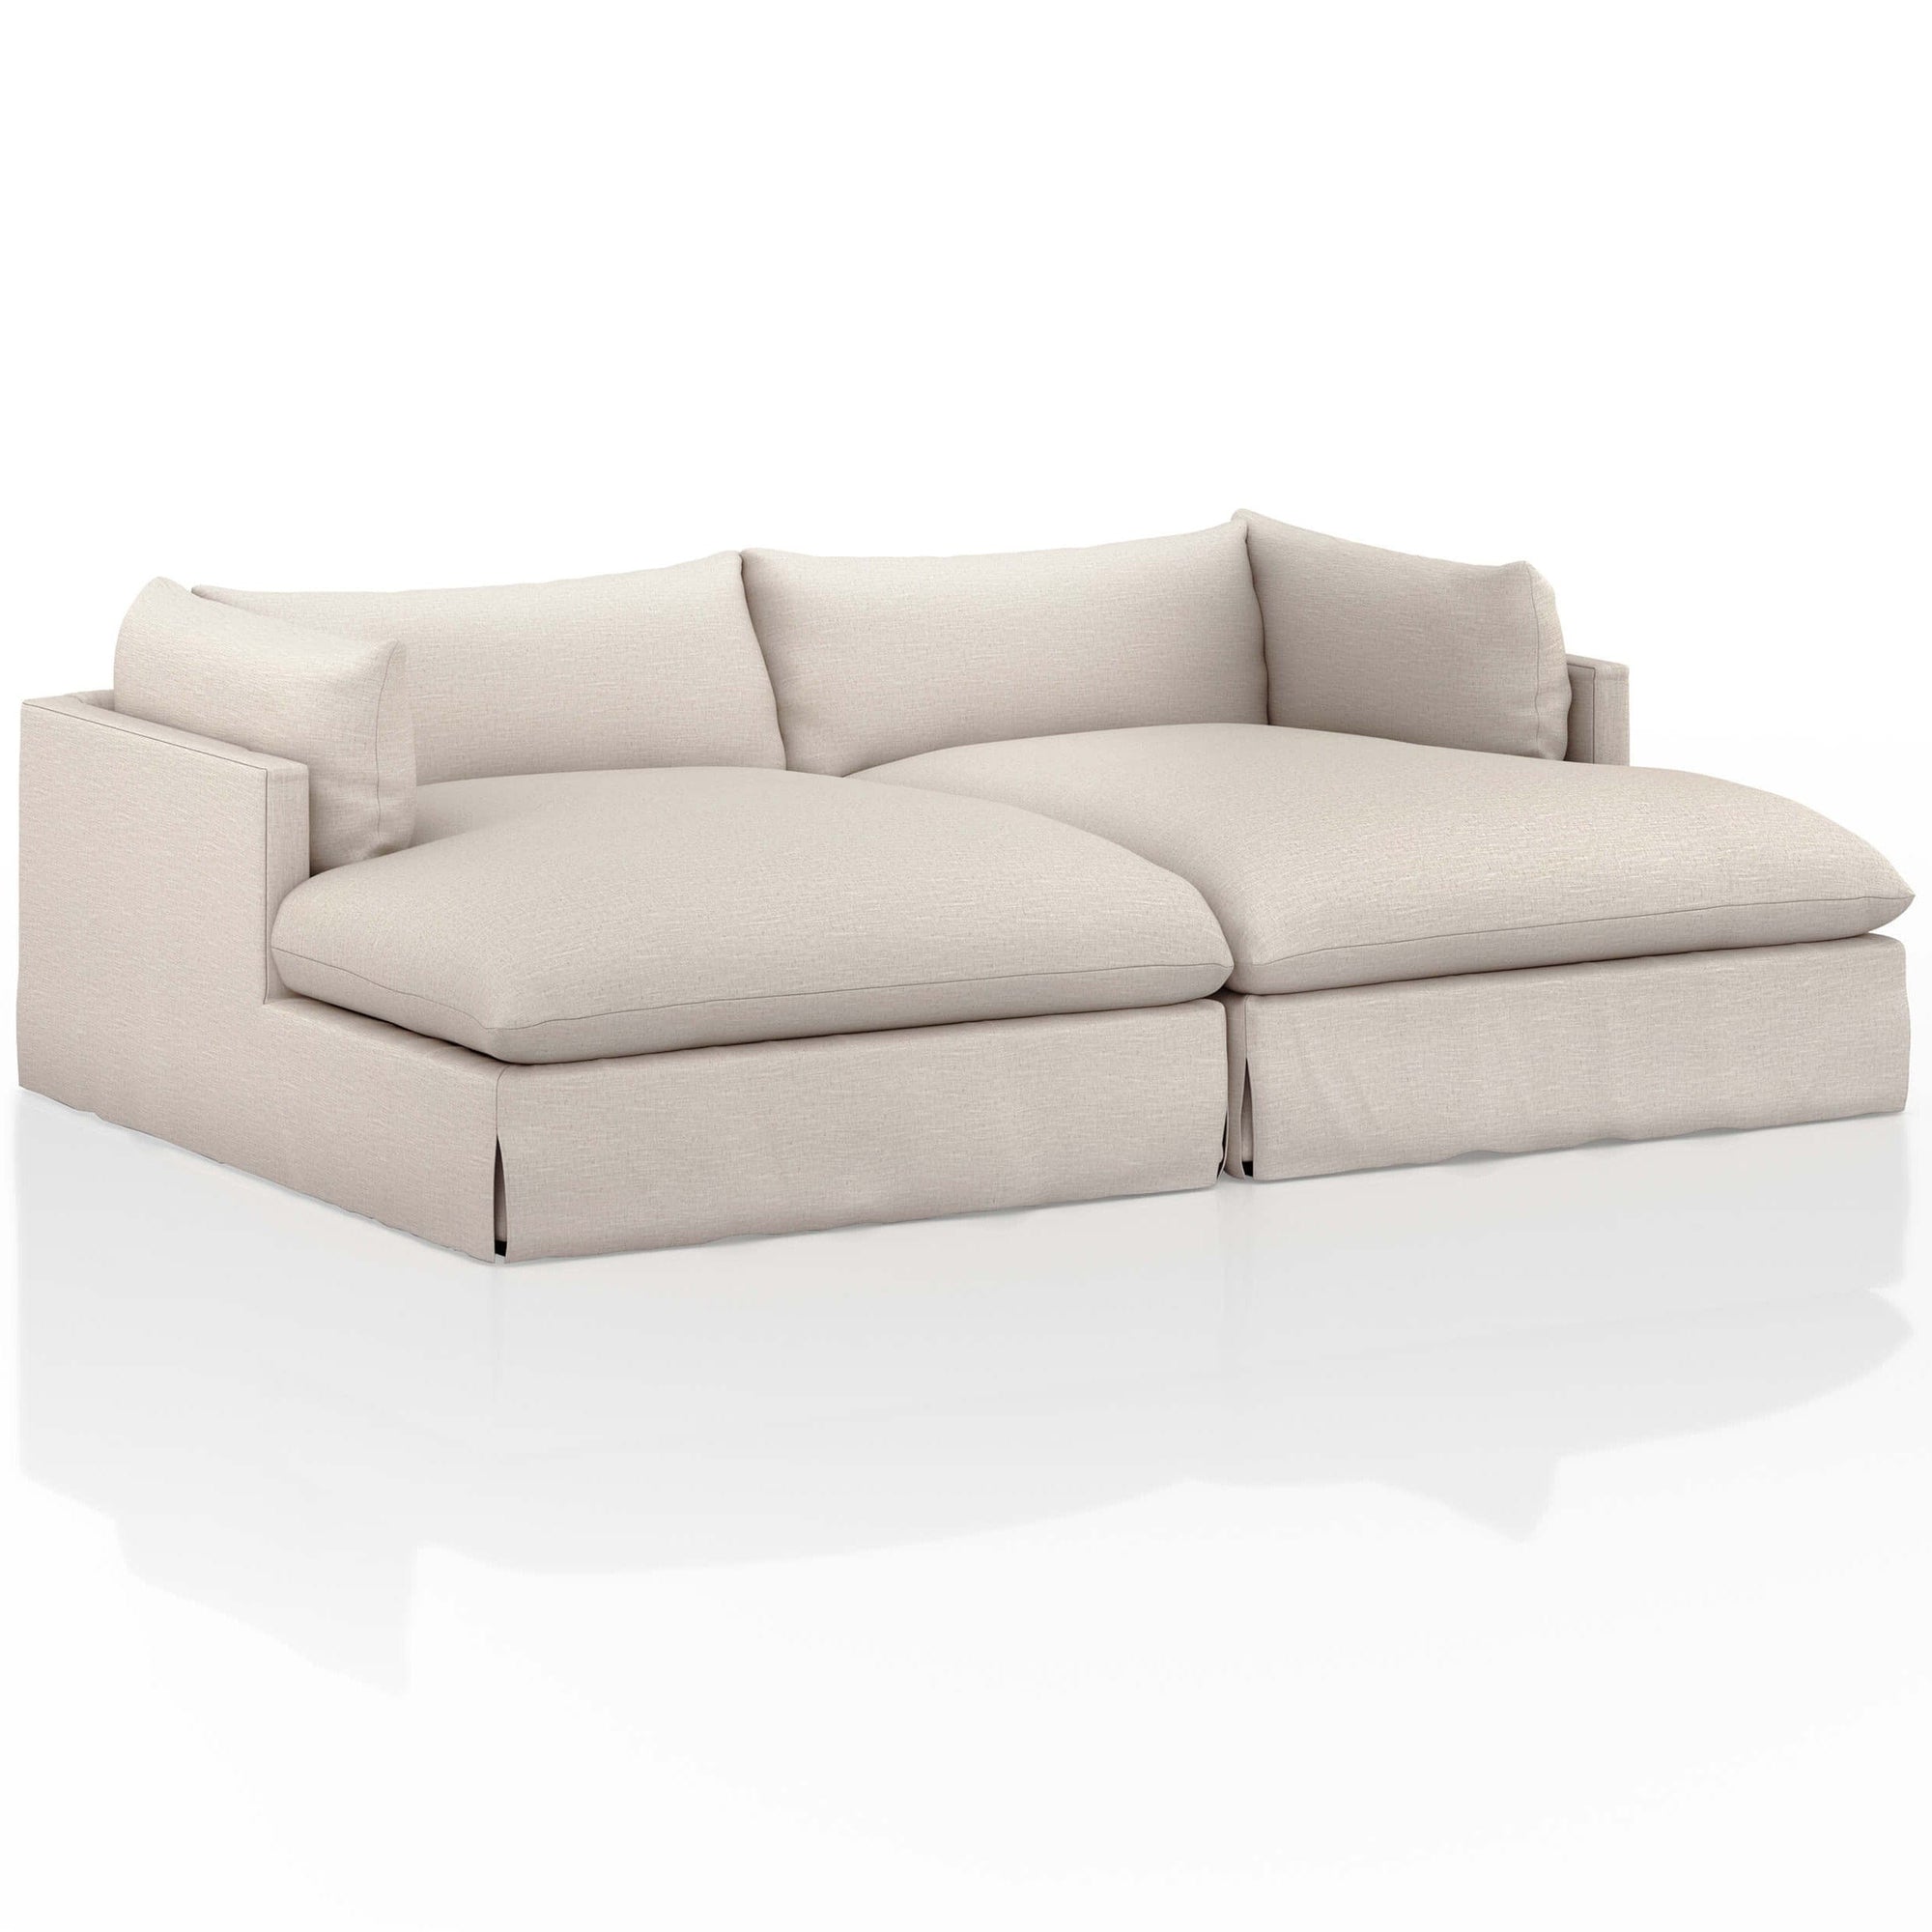 Habitat 102 Double Chaise Sectional Valley Nimbus High Fashion Home